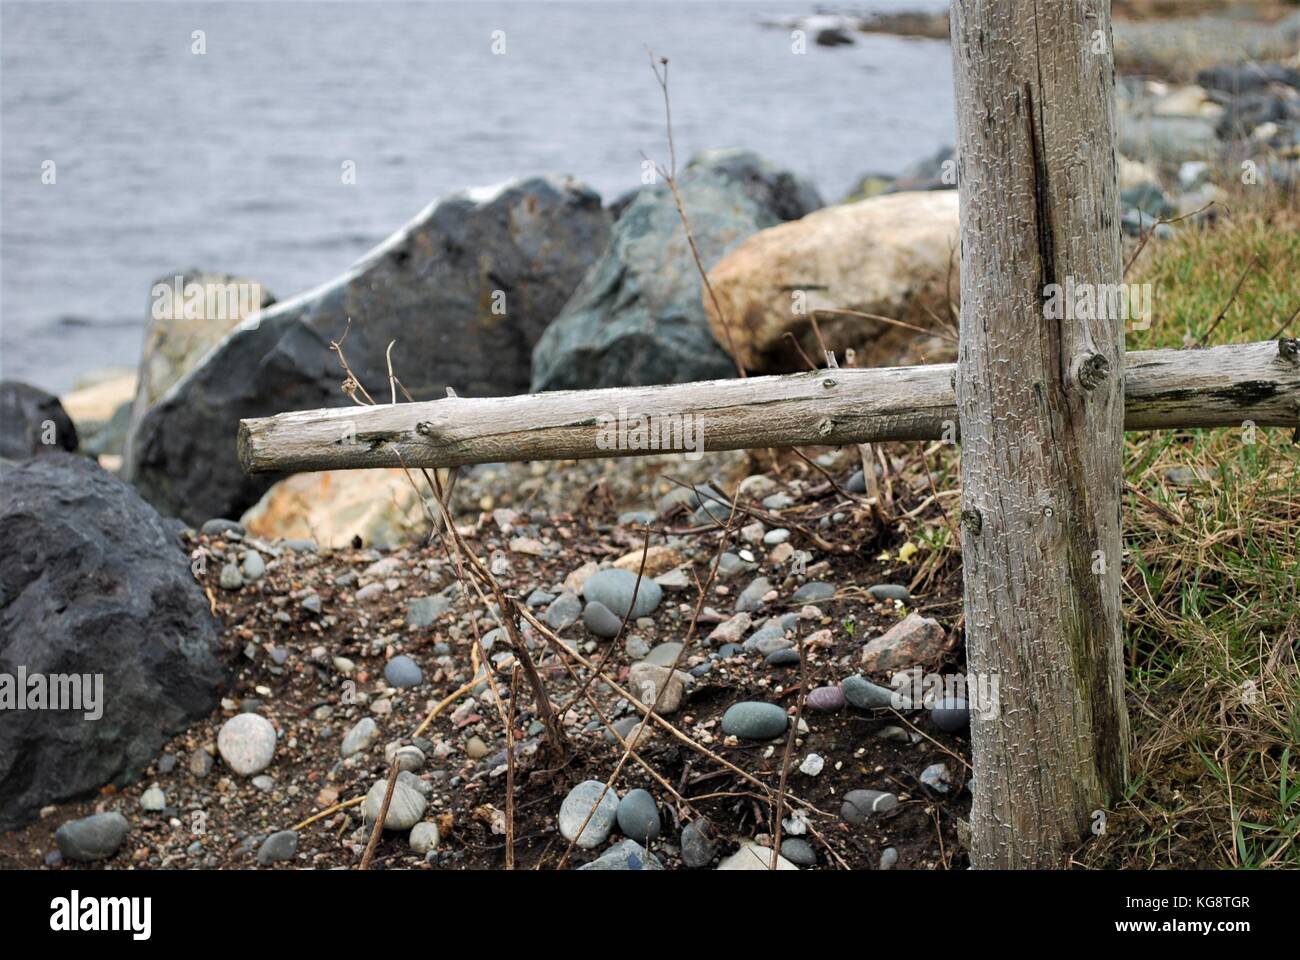 End of fence, fence post and rail. Fence ends just before beach. Some beach and ocean in frame. Stock Photo